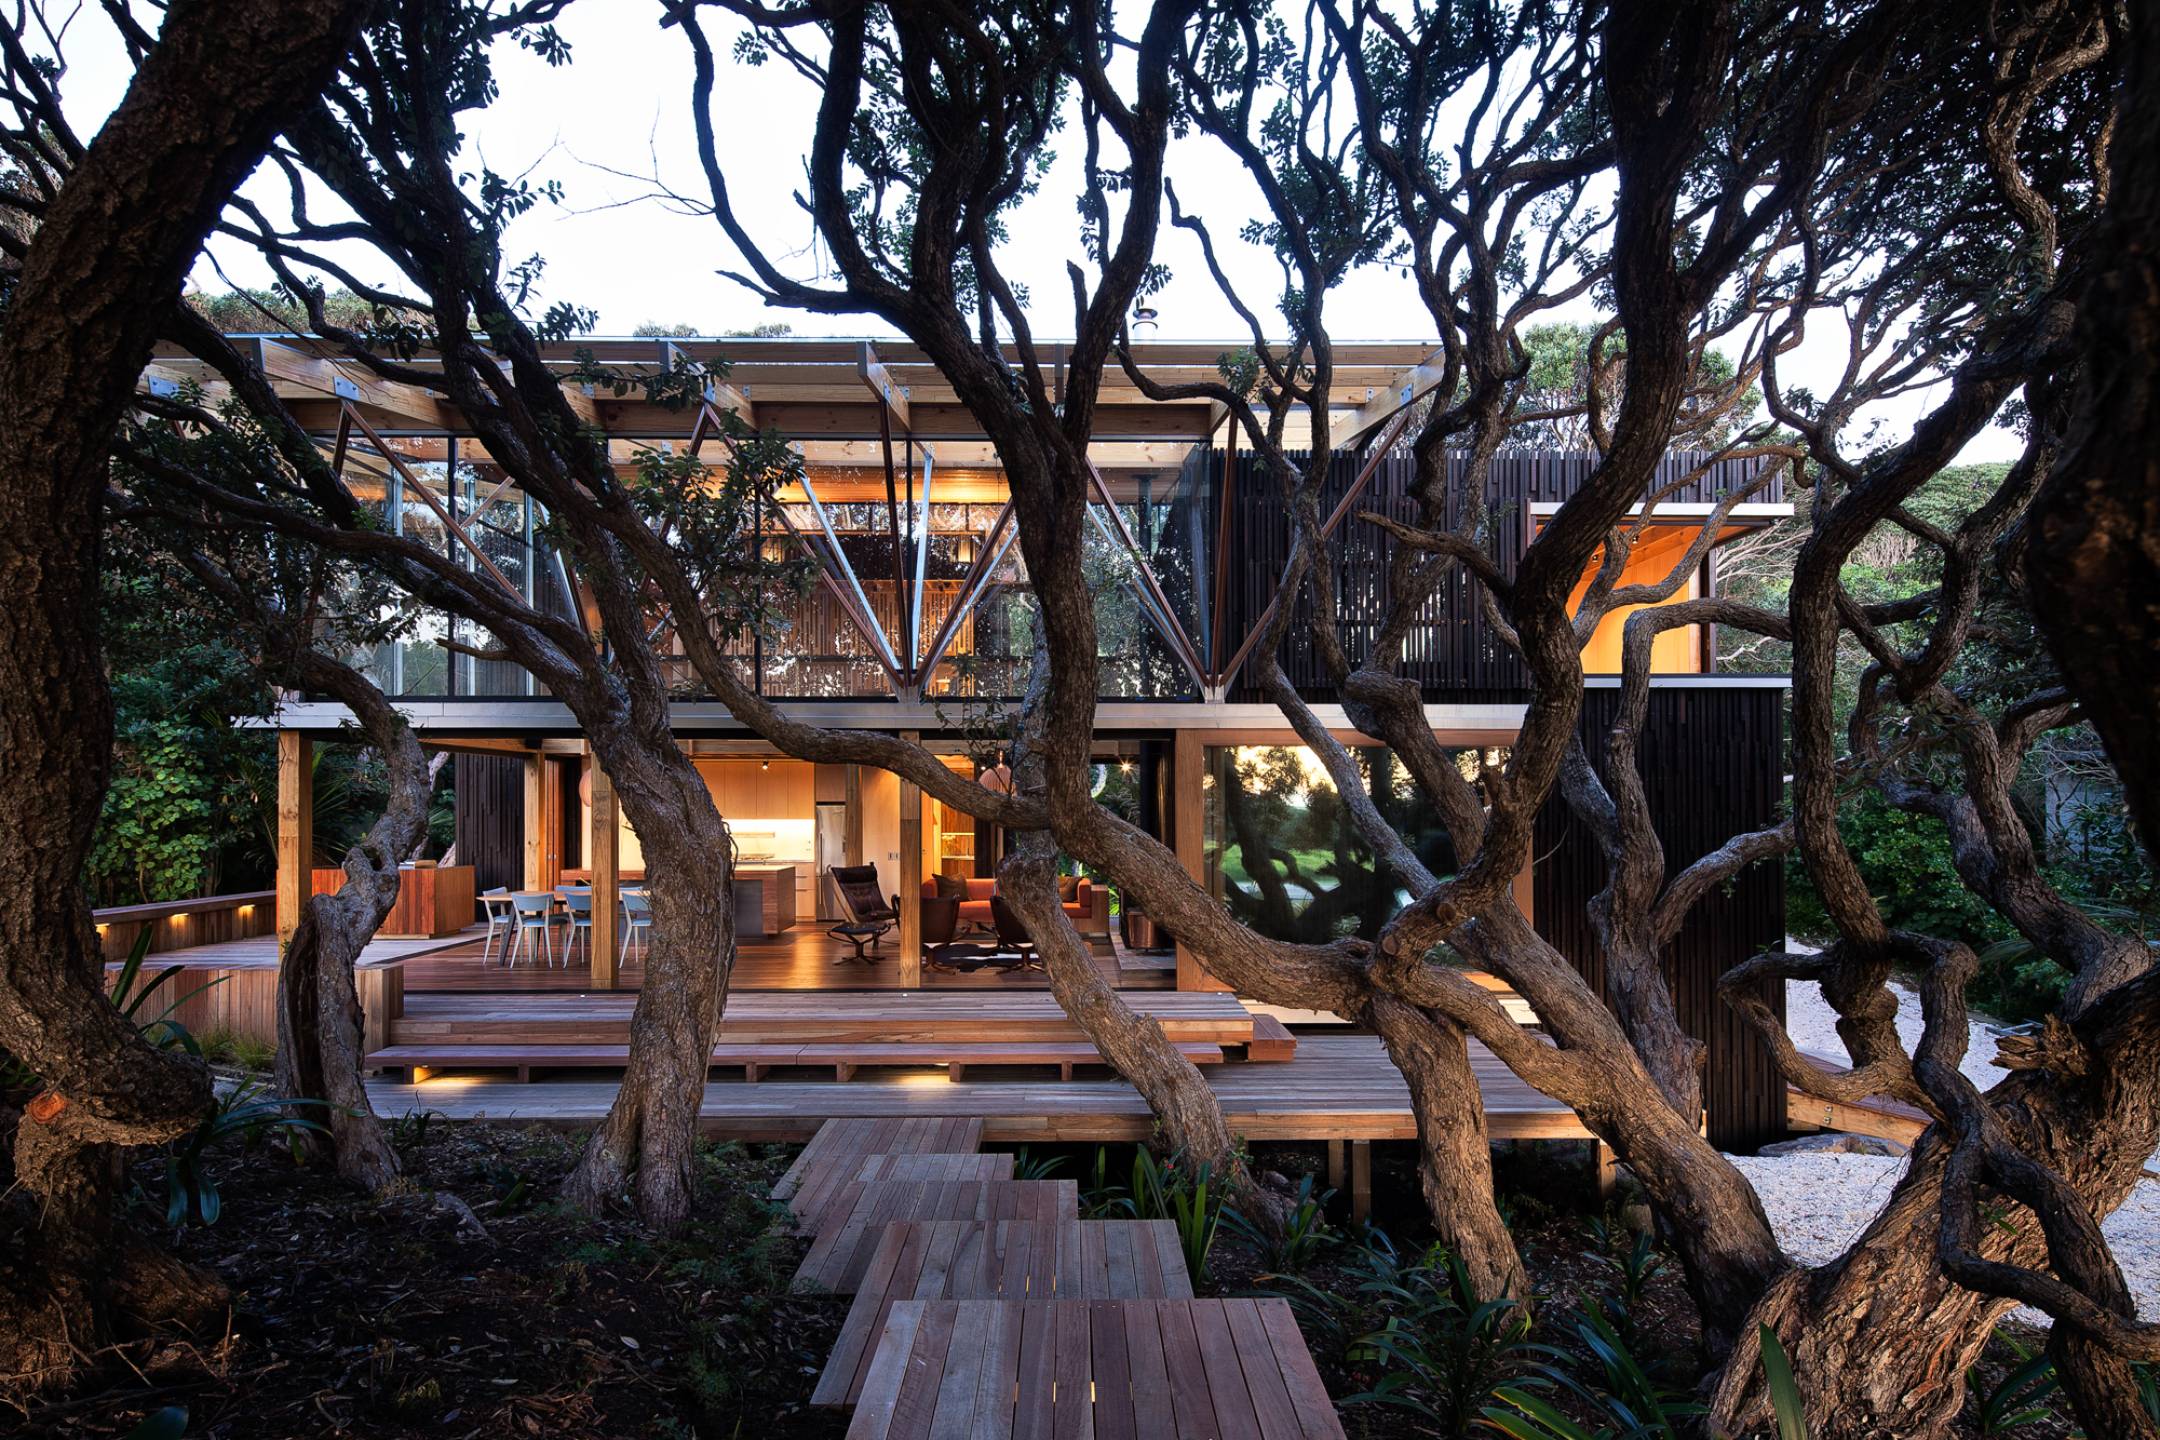 Under Pohutukawa by Herbst Architects